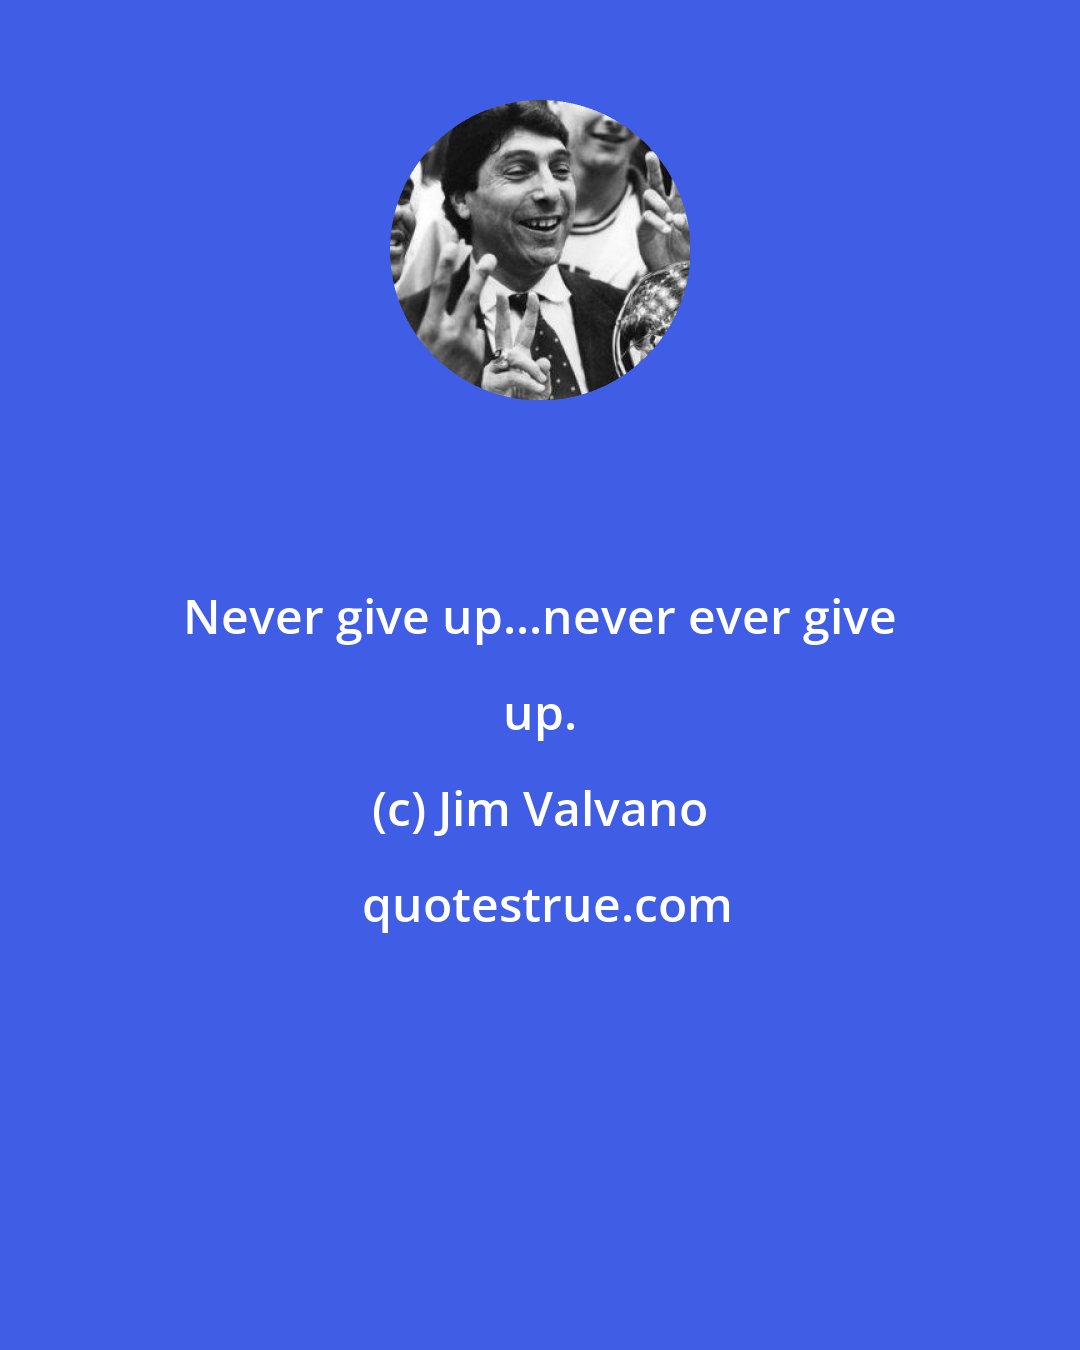 Jim Valvano: Never give up...never ever give up.